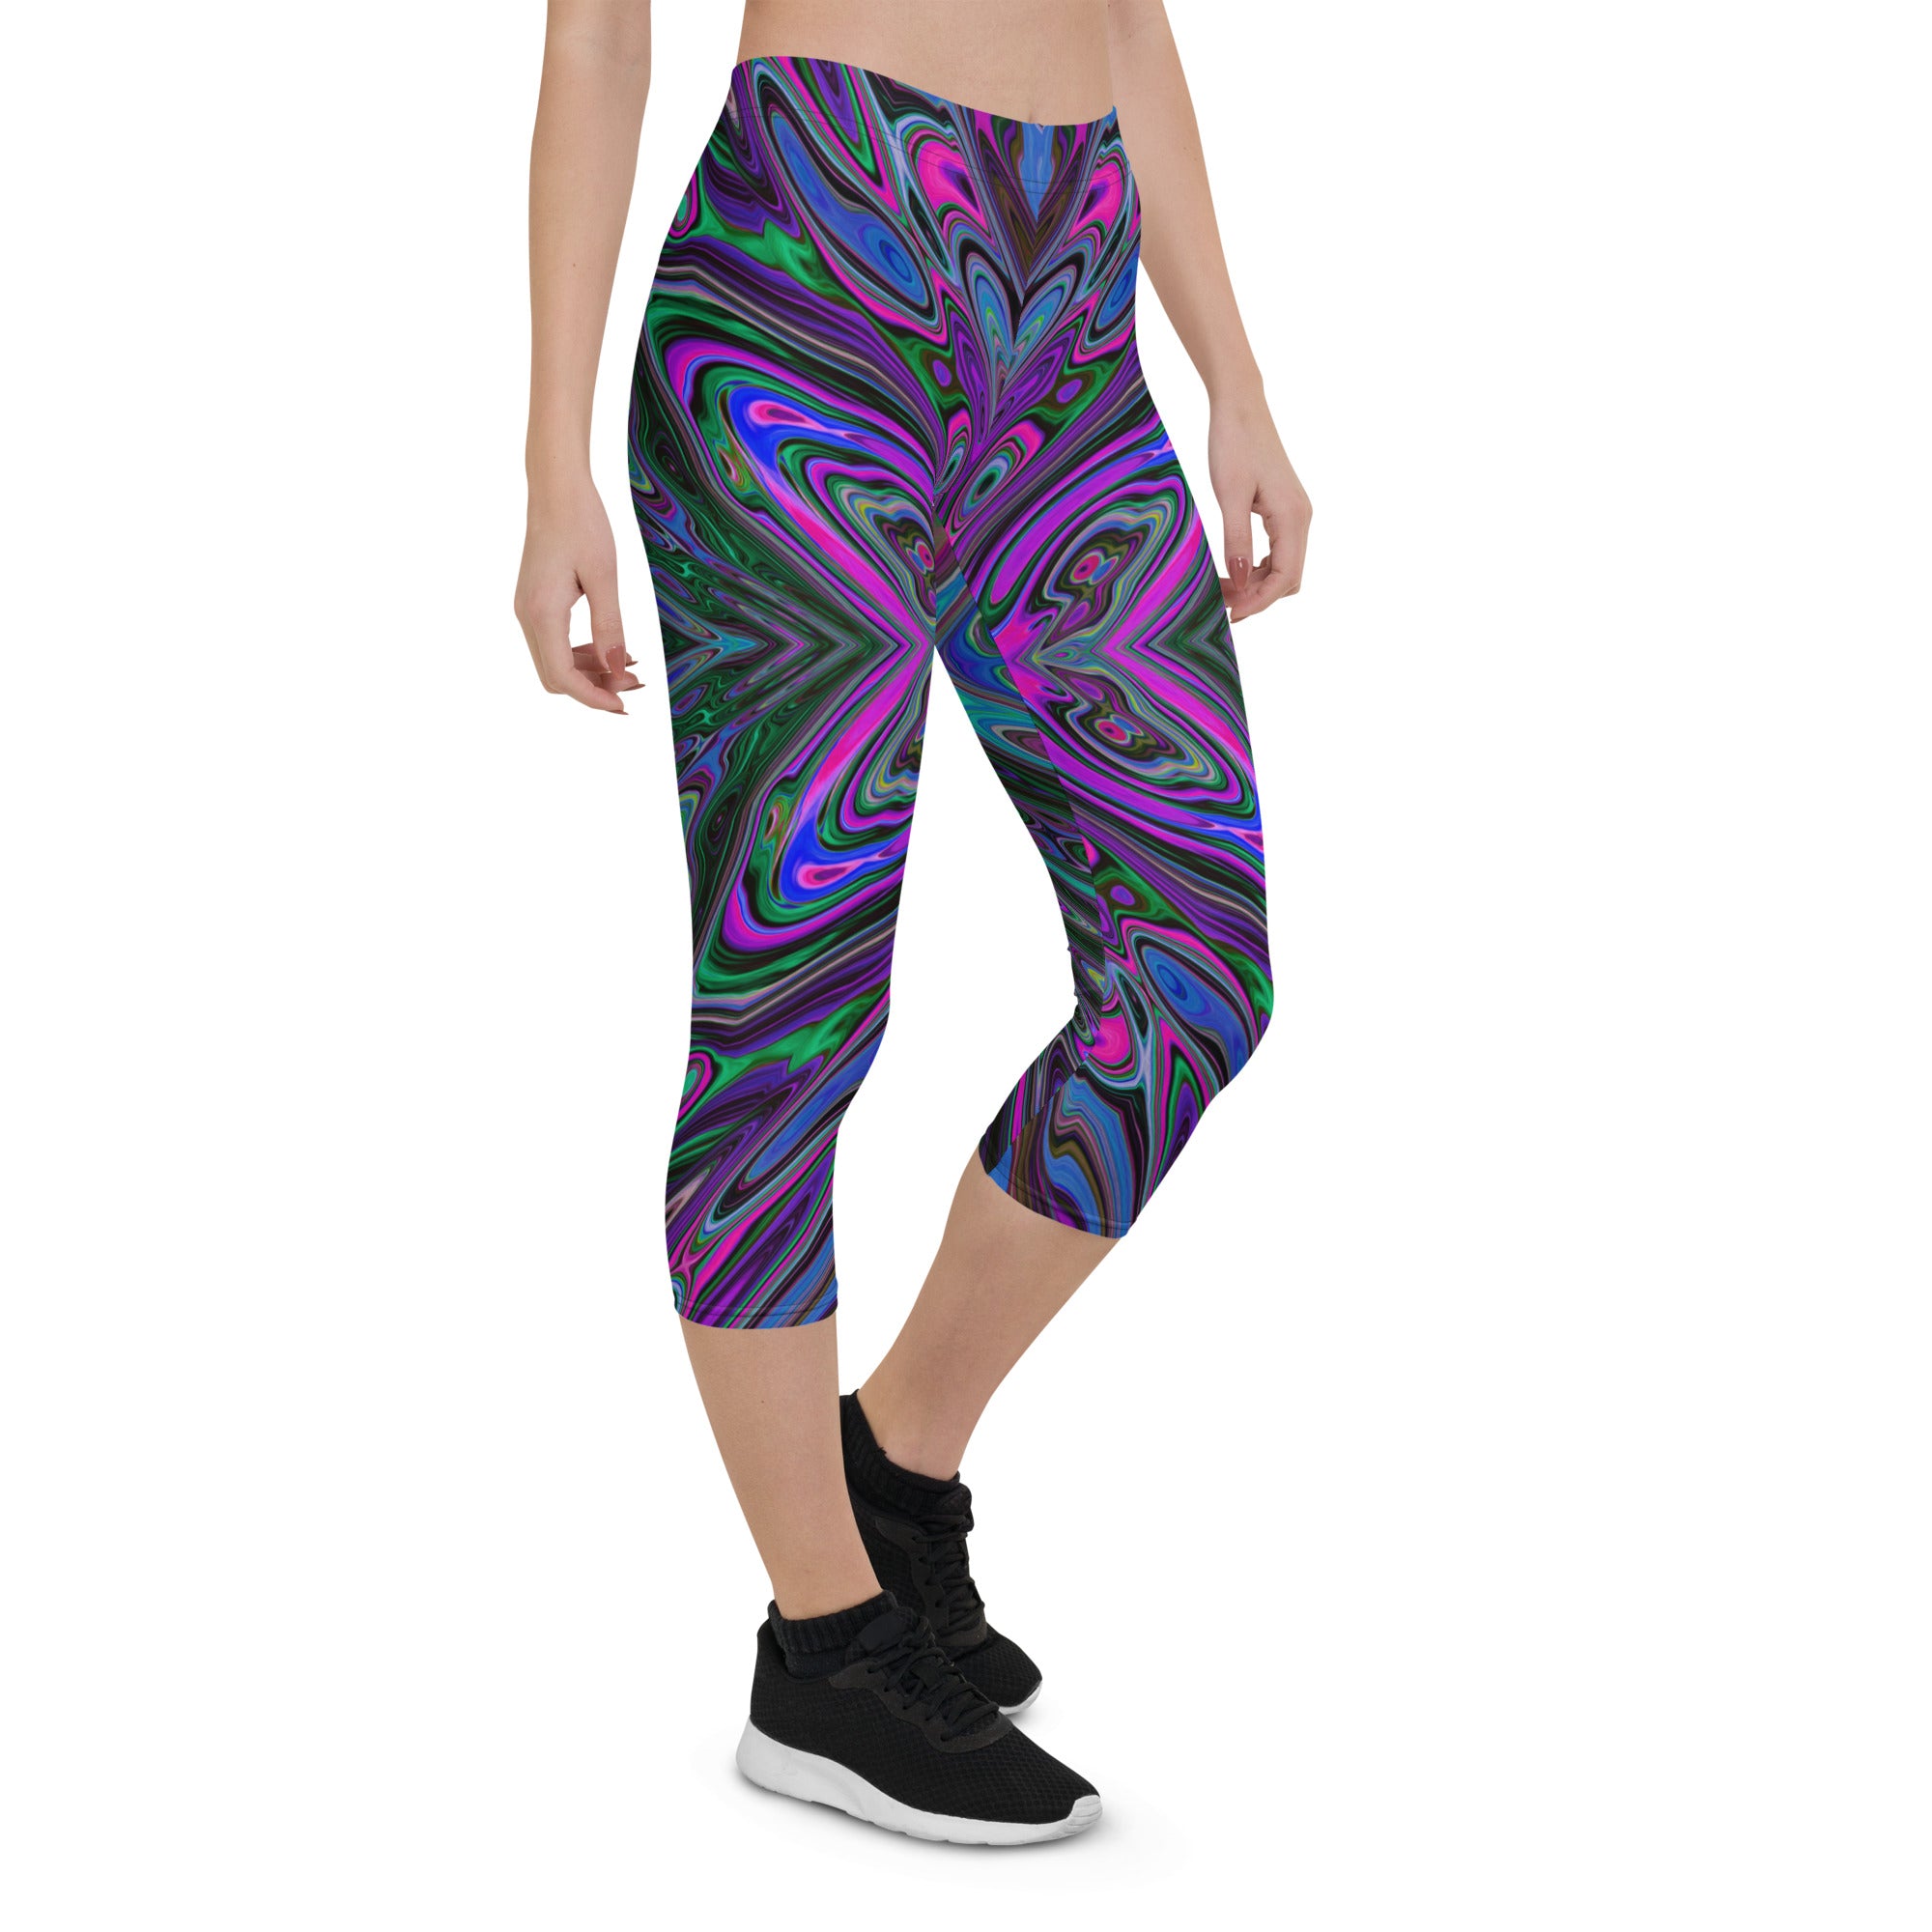 Capri Leggings, Trippy Magenta, Blue and Green Abstract Butterfly